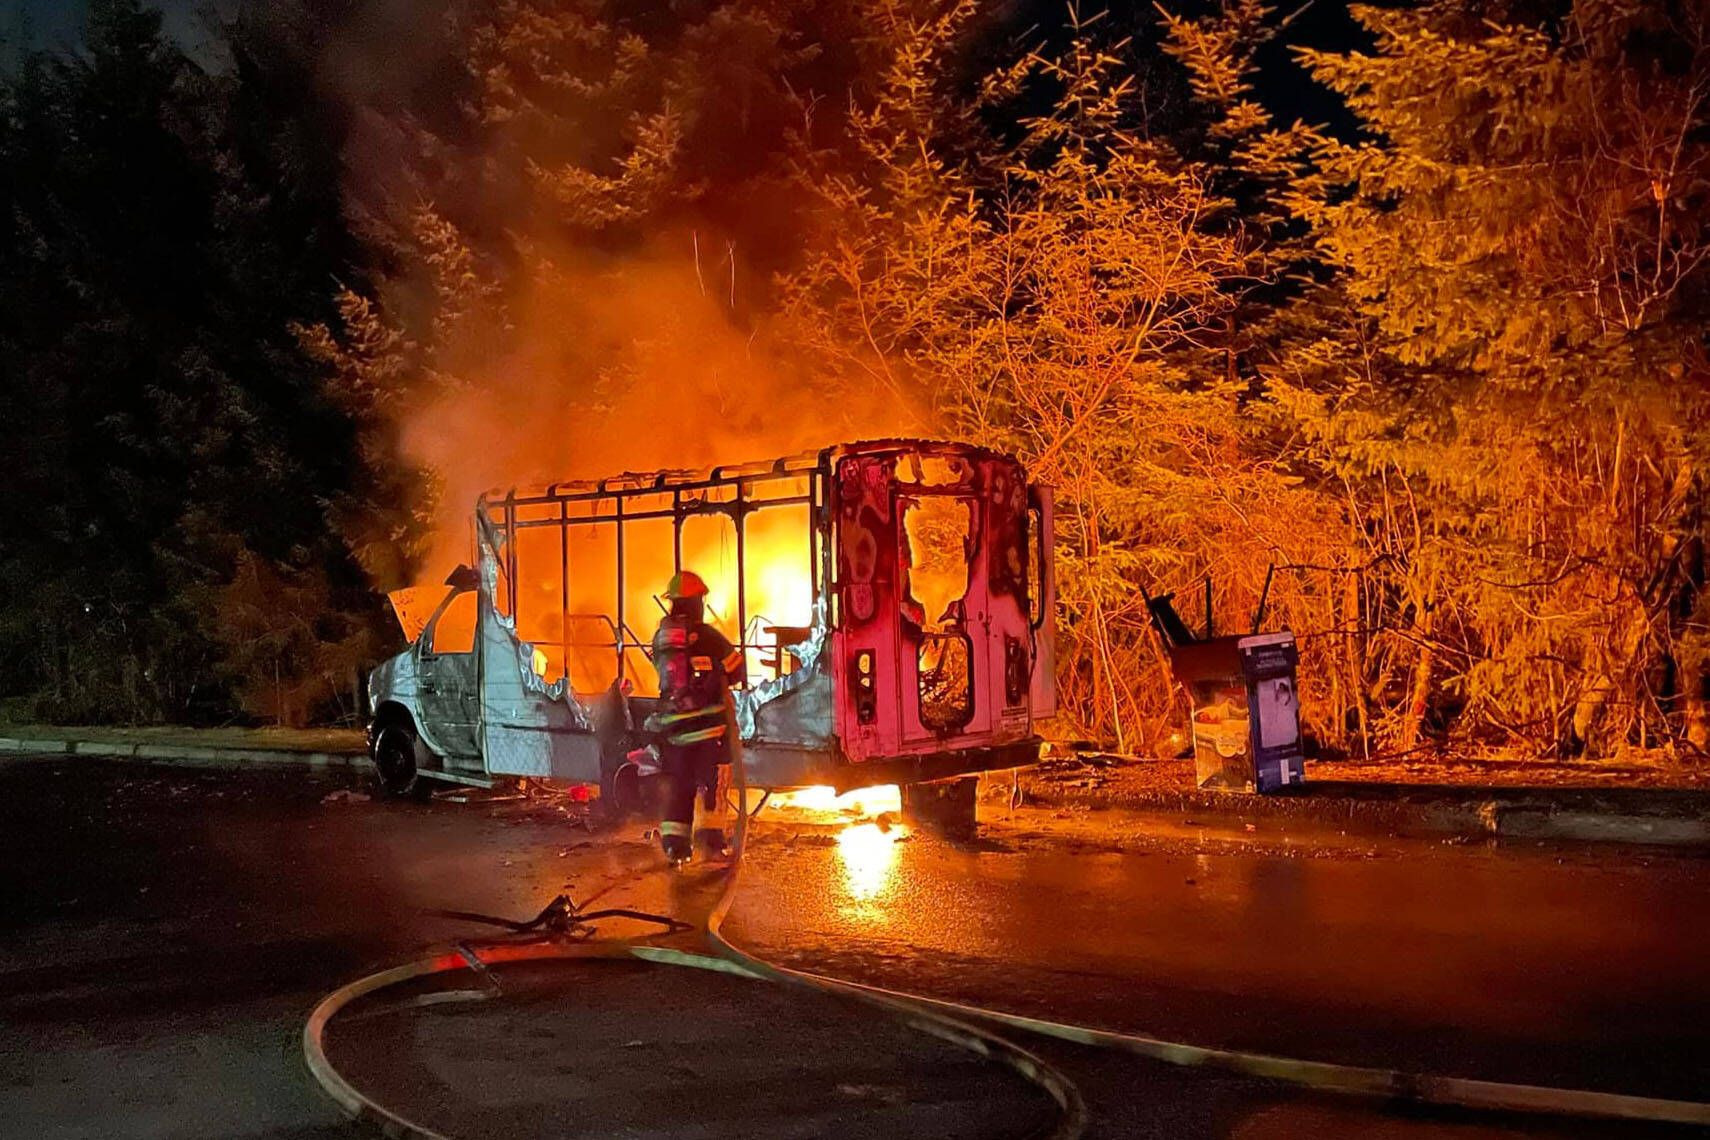 Courtesy photo / Travis Mead 
A Capital City Fire/Rescue firefighter moves to extinguish and early morning vehicle fire on April 19, 2022. The cause of the fire is under investigation.